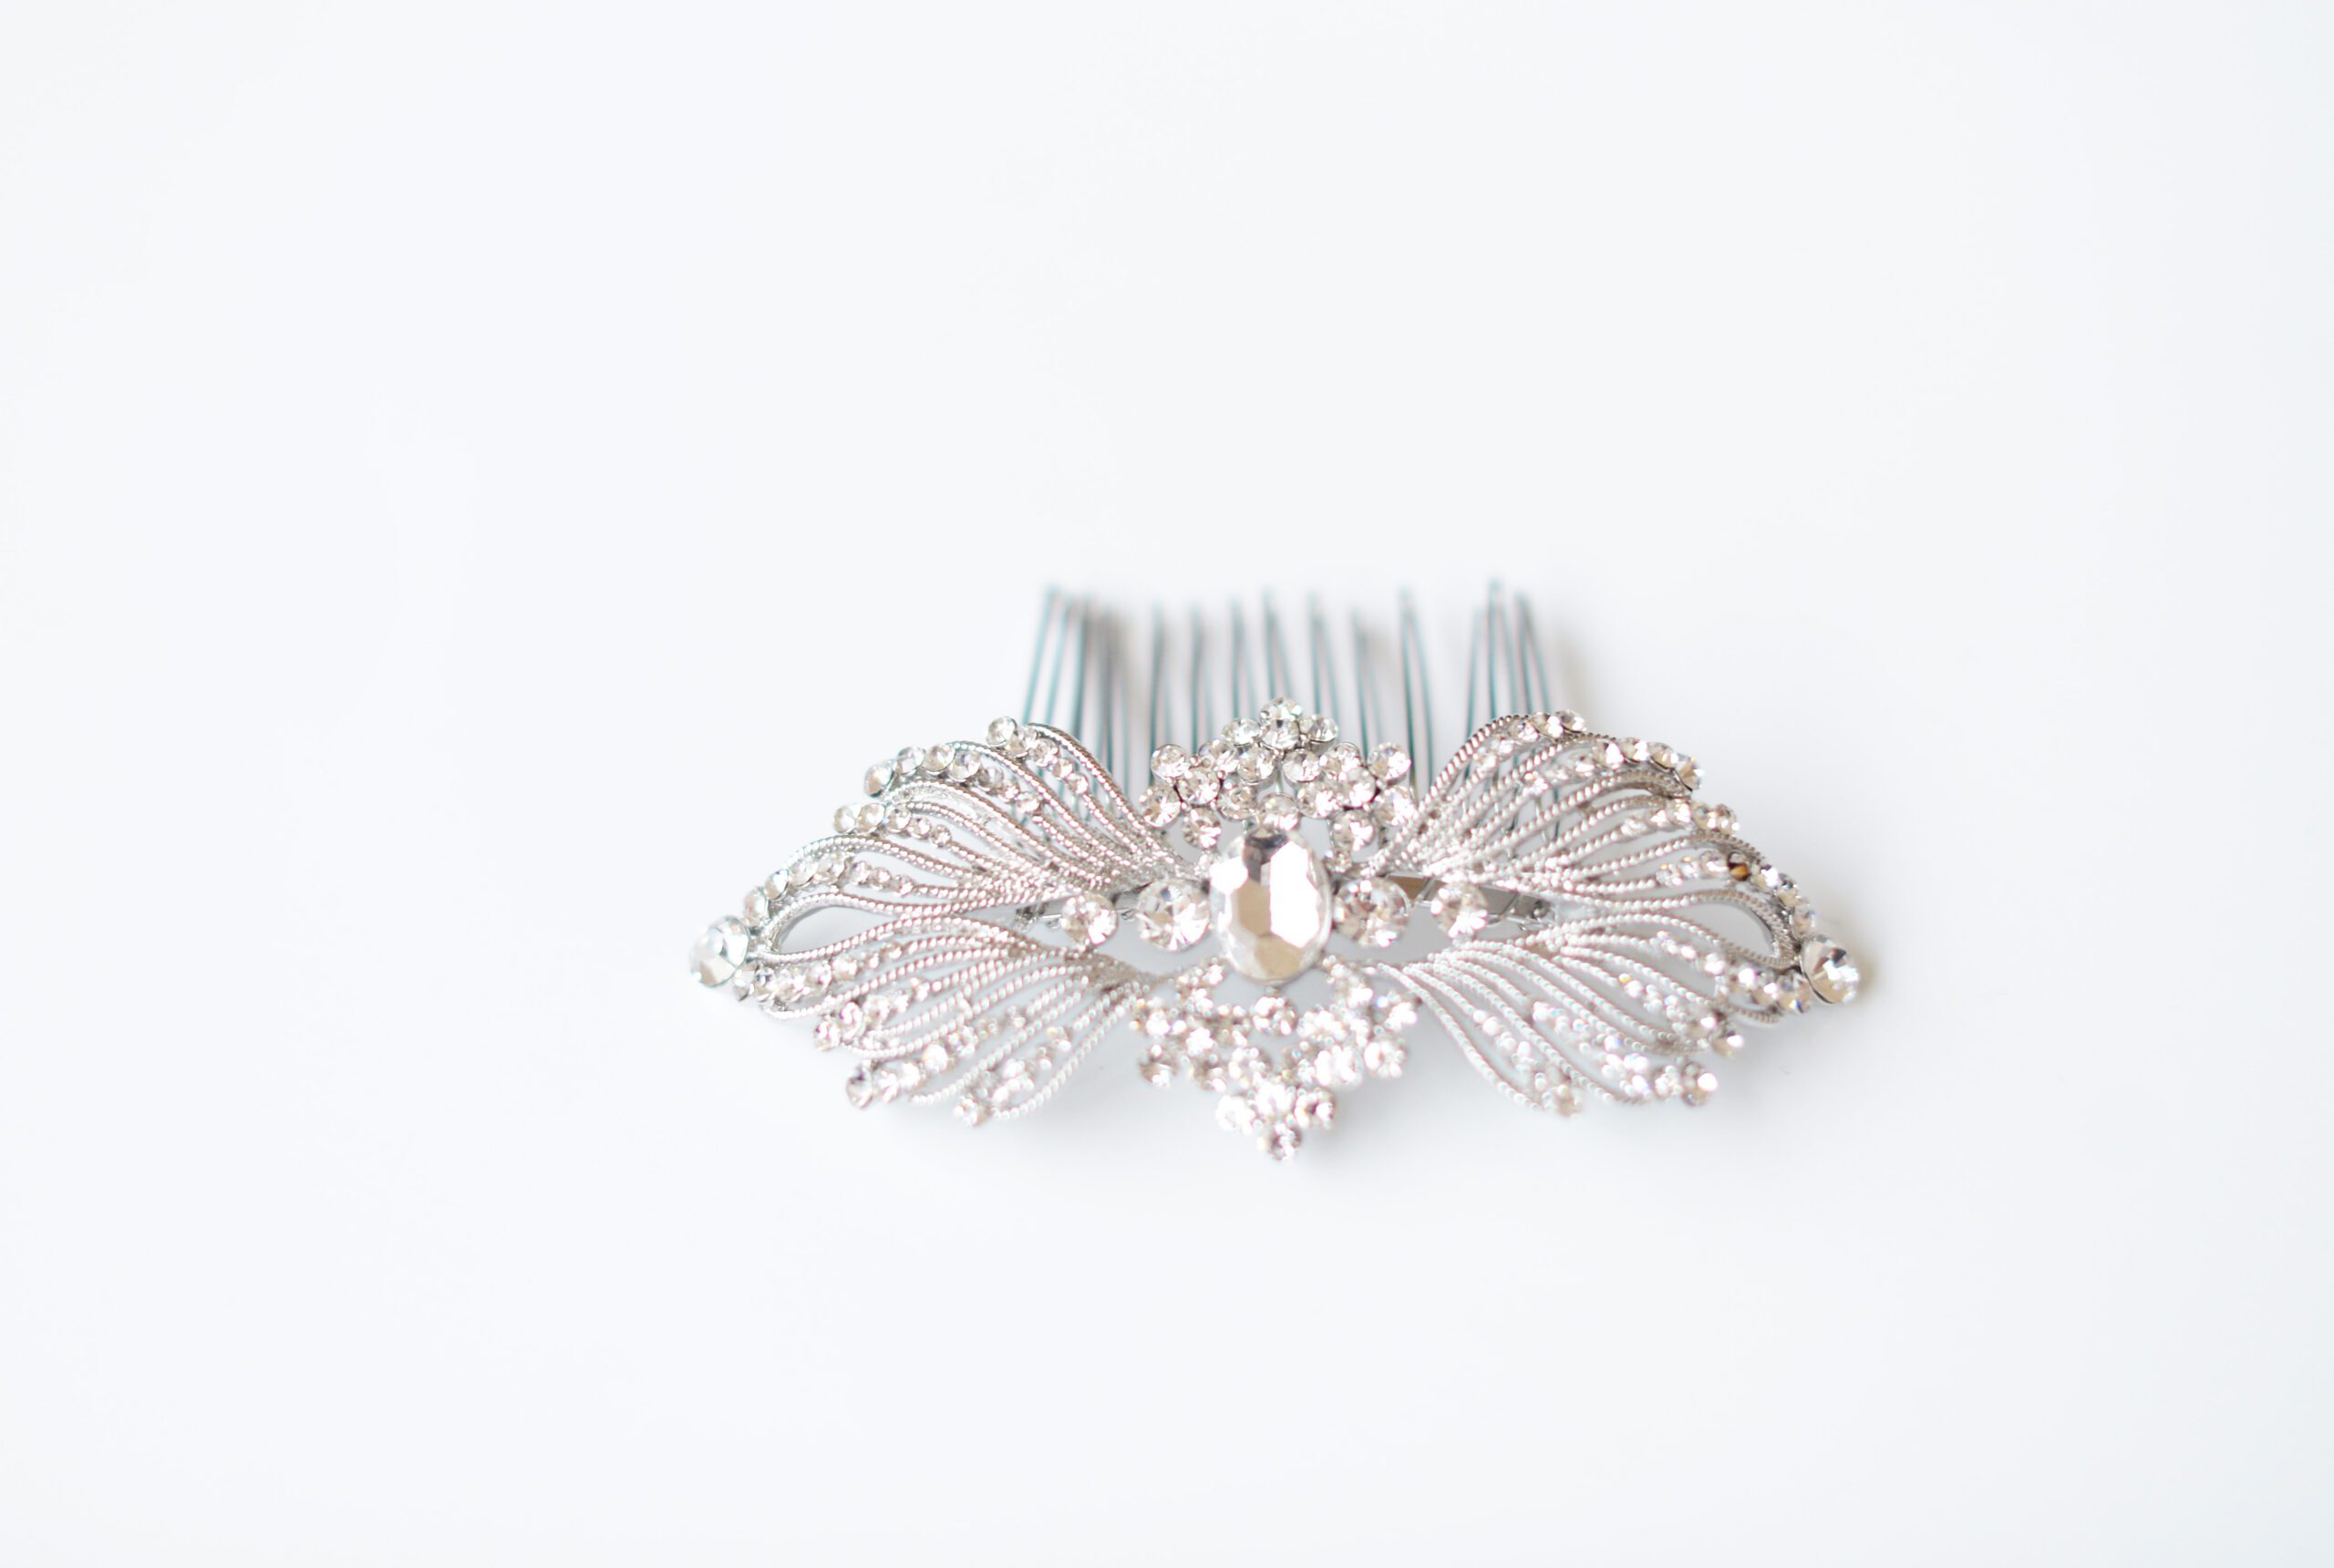 A photo of a silver bridal hair comb in an art deco style